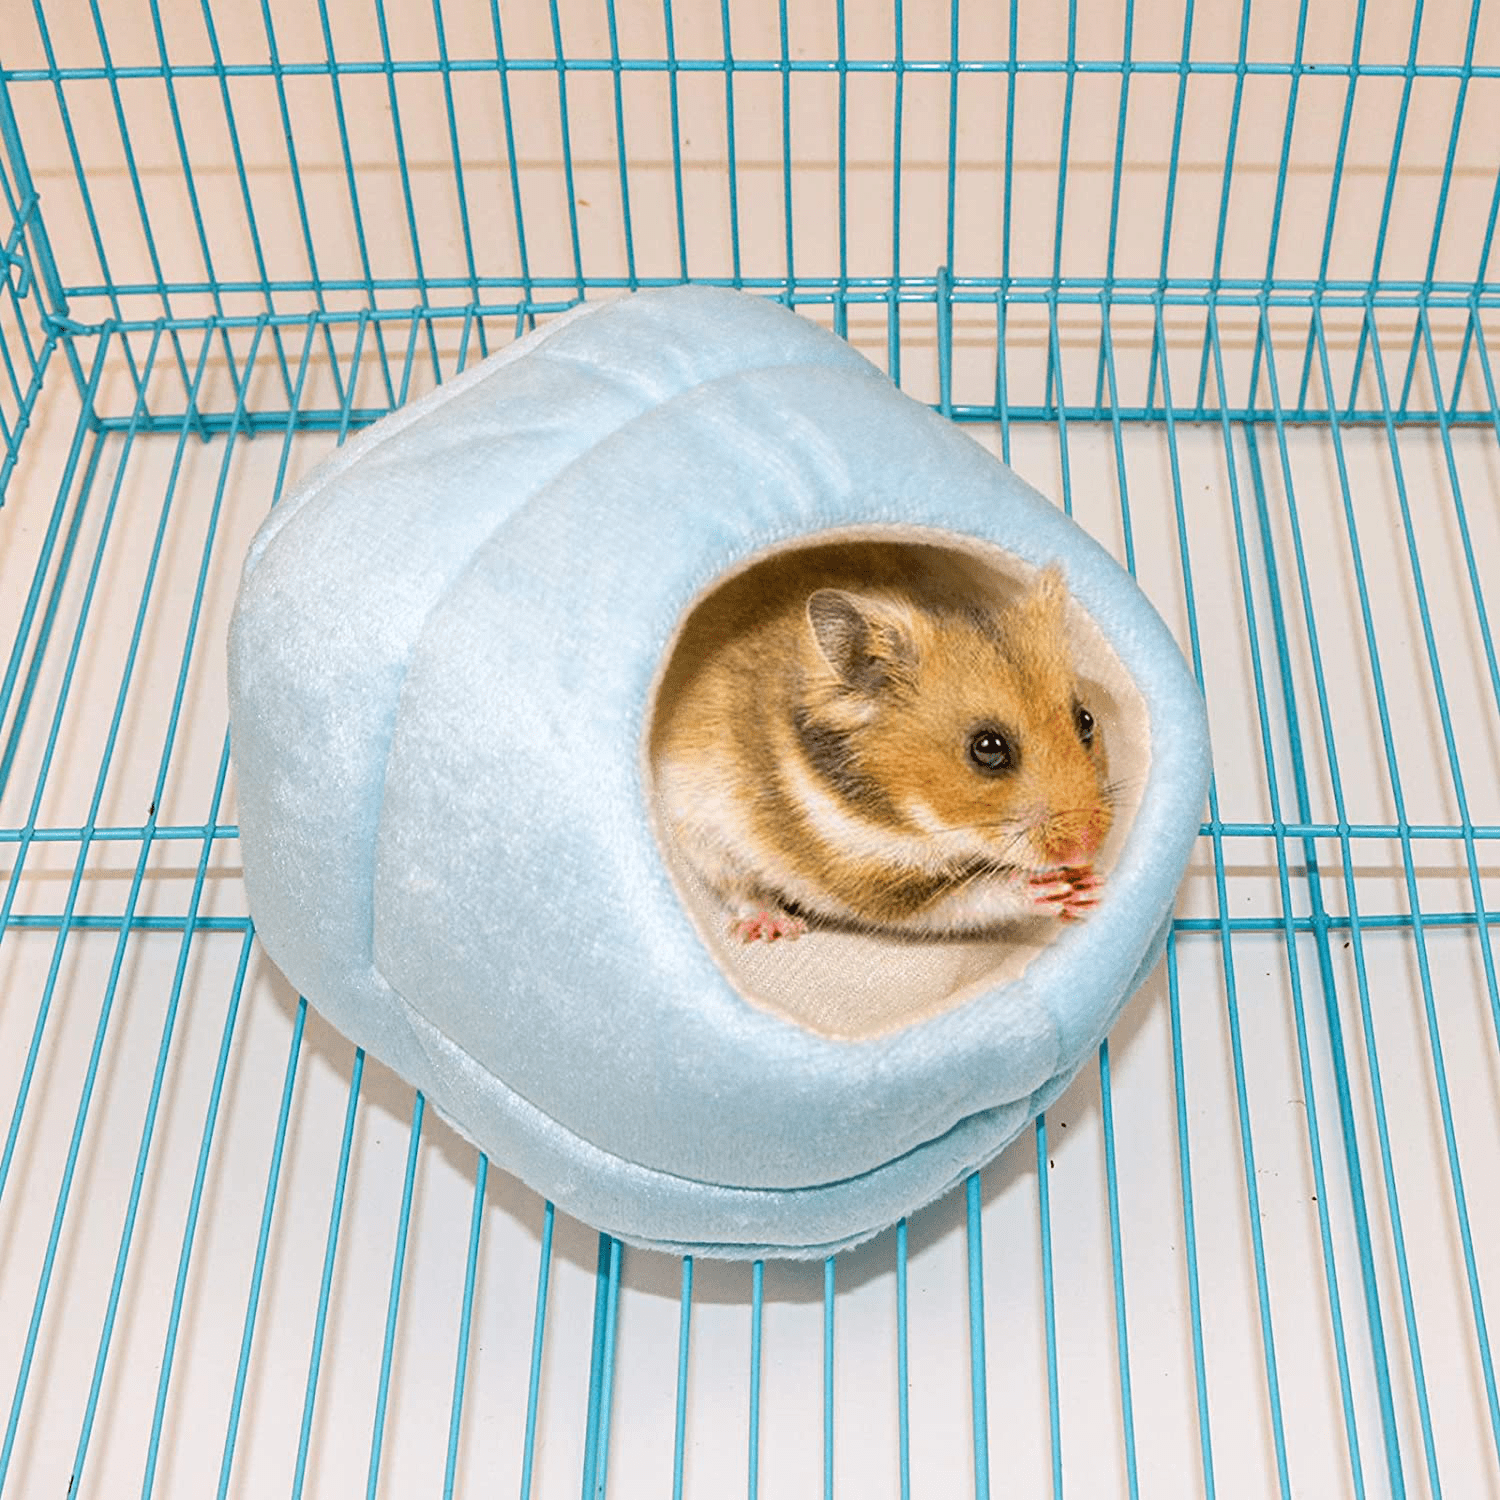 2 Packs Hamster Slippers House, Small Animal Thermal Pad Sleeping Bag House, Small Pet Slippers Nest, Guinea Pig Hedgehog Squirrel Winter Cold-Proof Warm House, Removable Cage Nest Room Accessories